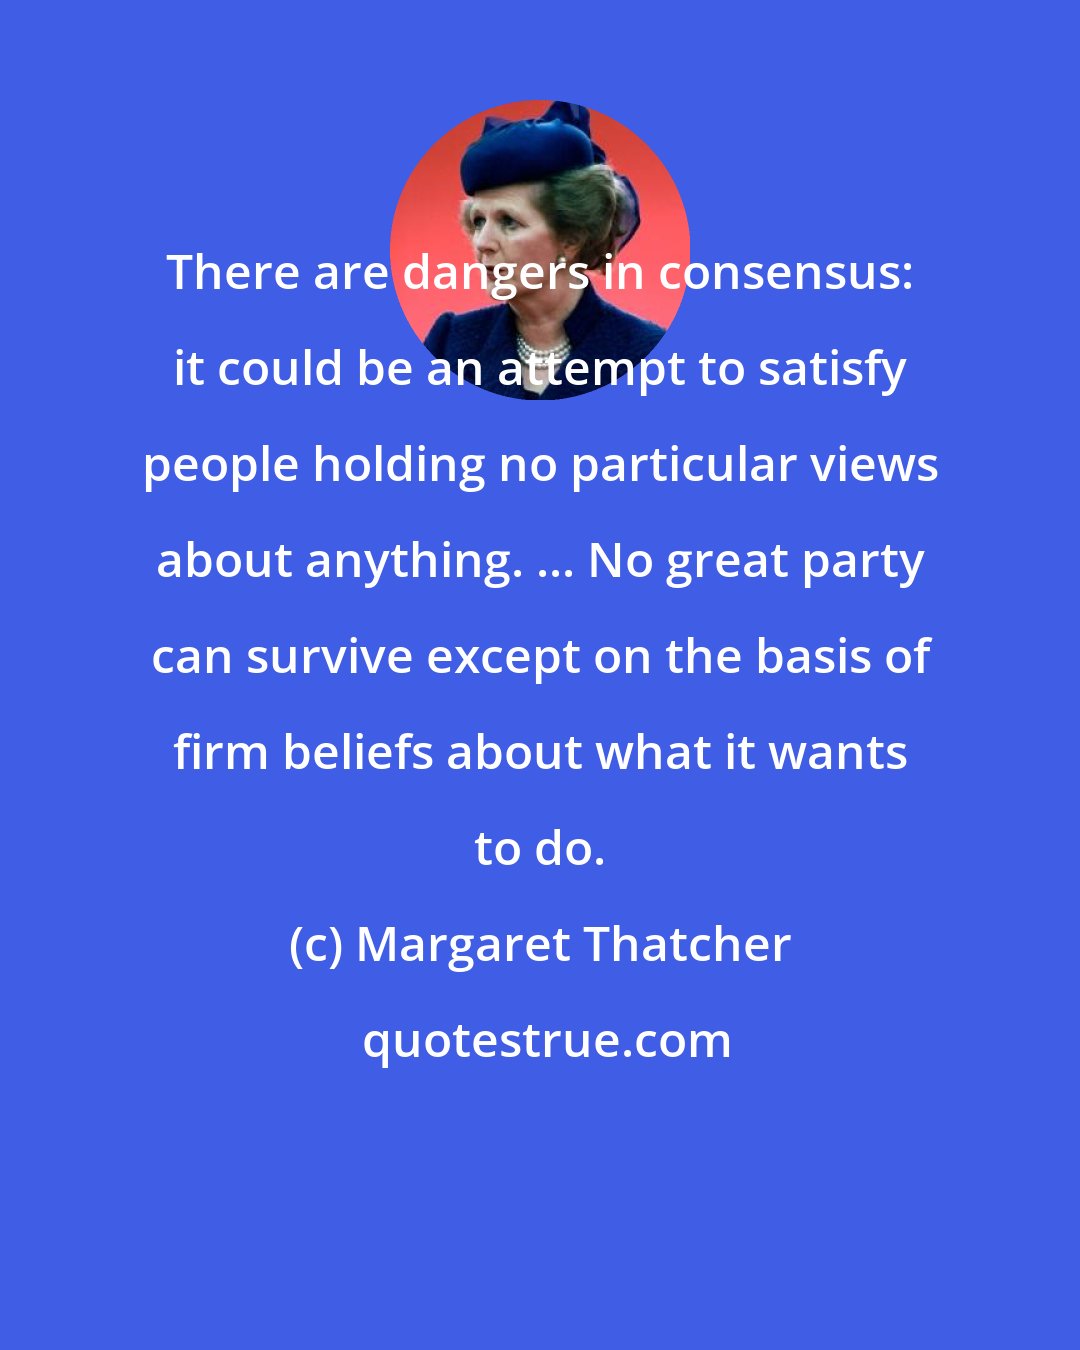 Margaret Thatcher: There are dangers in consensus: it could be an attempt to satisfy people holding no particular views about anything. ... No great party can survive except on the basis of firm beliefs about what it wants to do.